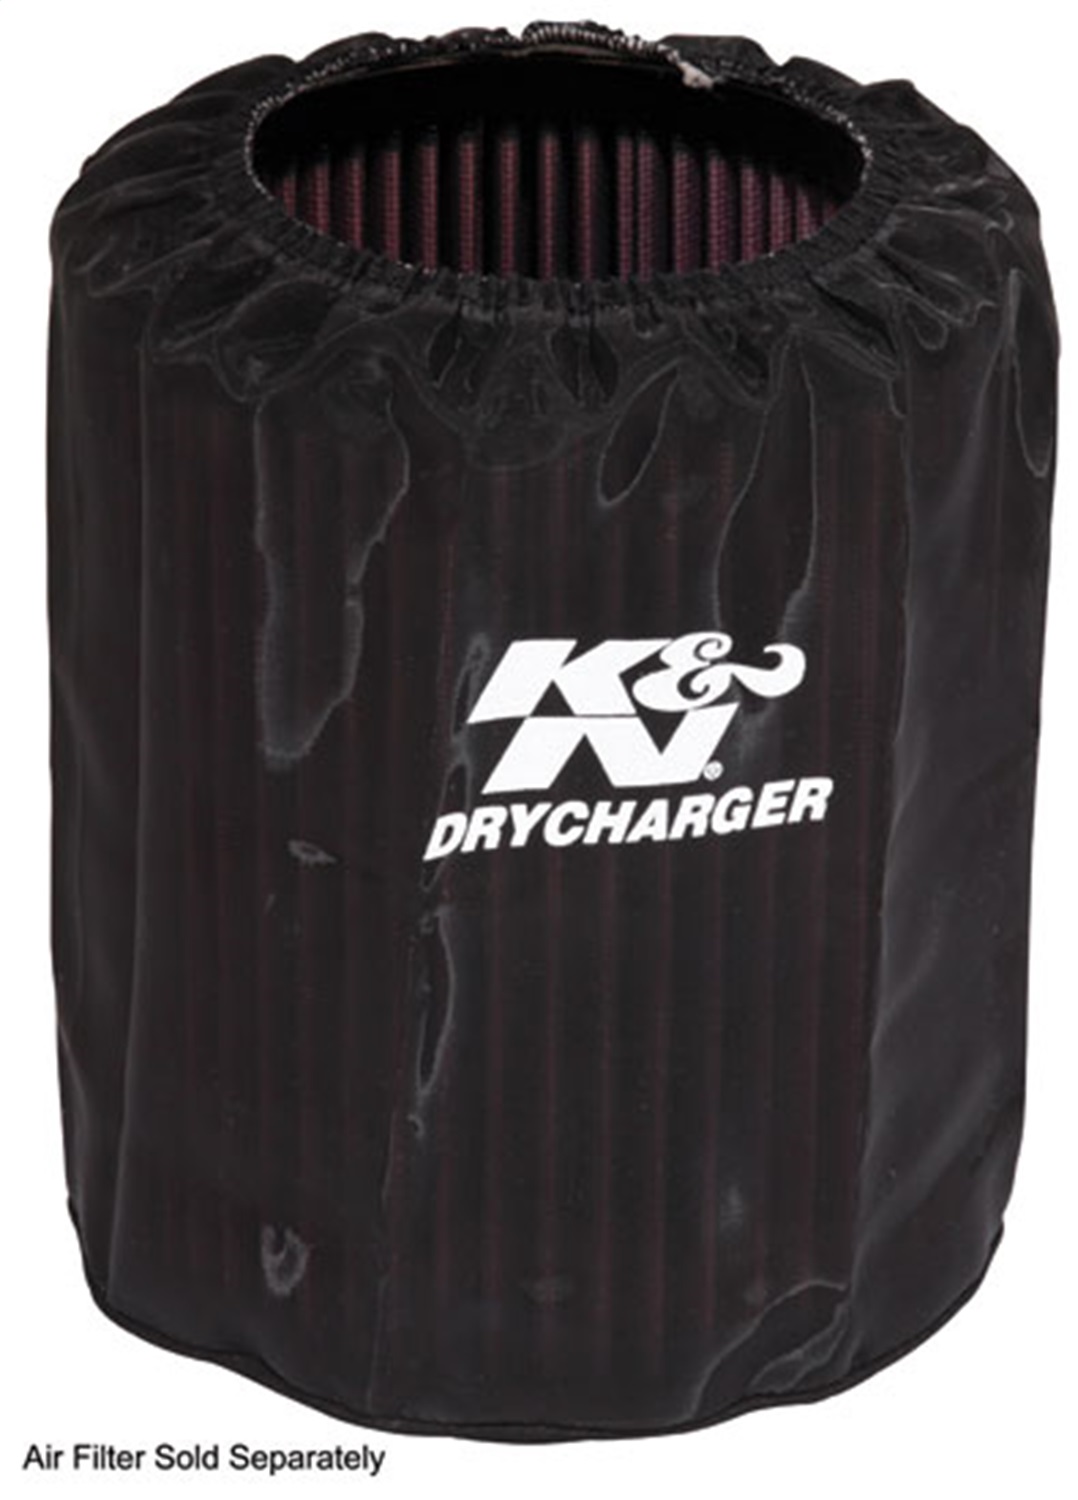 K&N Filters K&N Filters E-4710DK DryCharger Filter Wrap